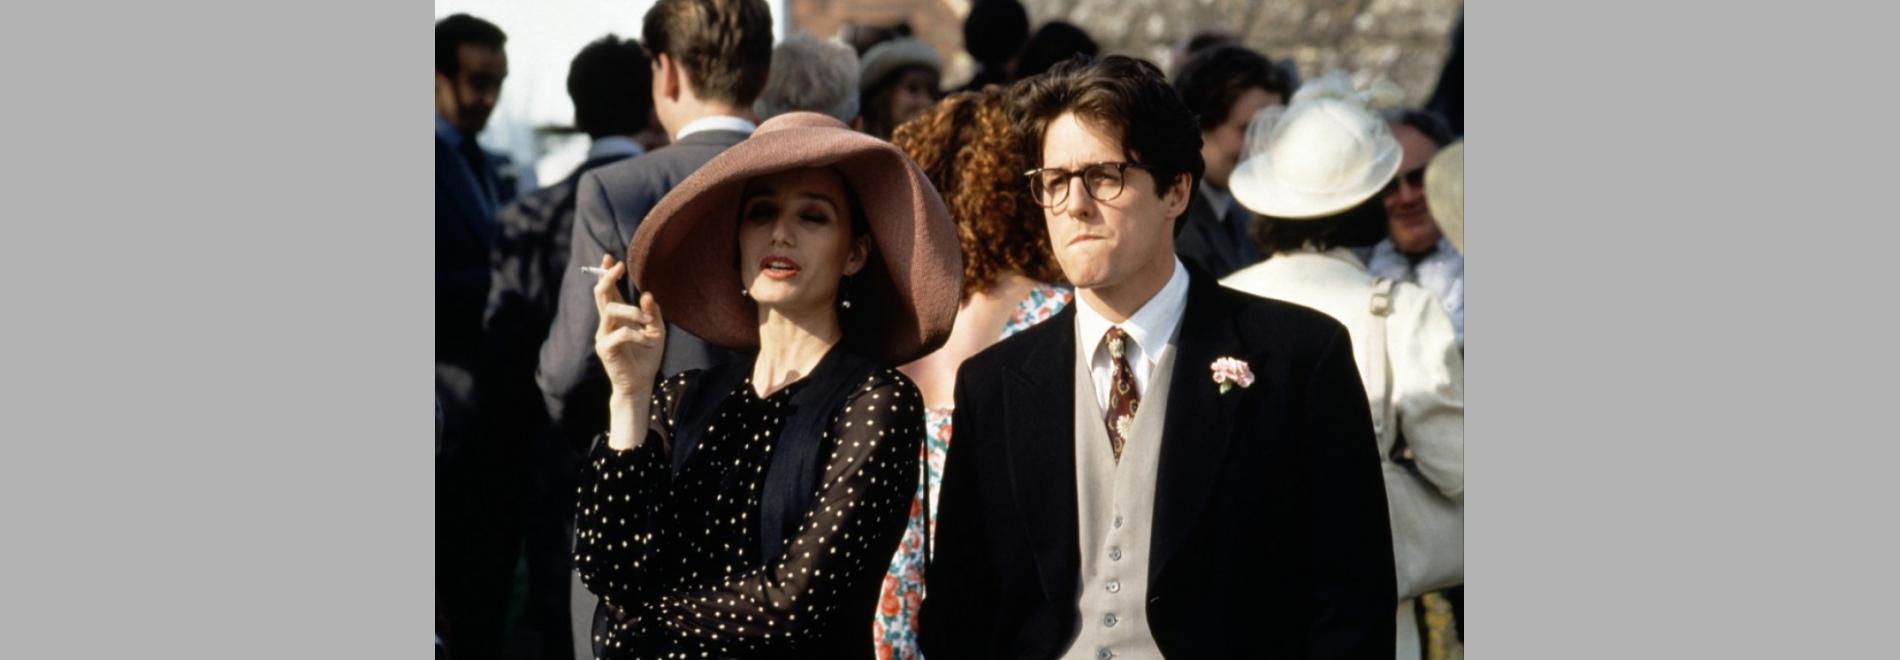 Four Weddings and a Funeral 